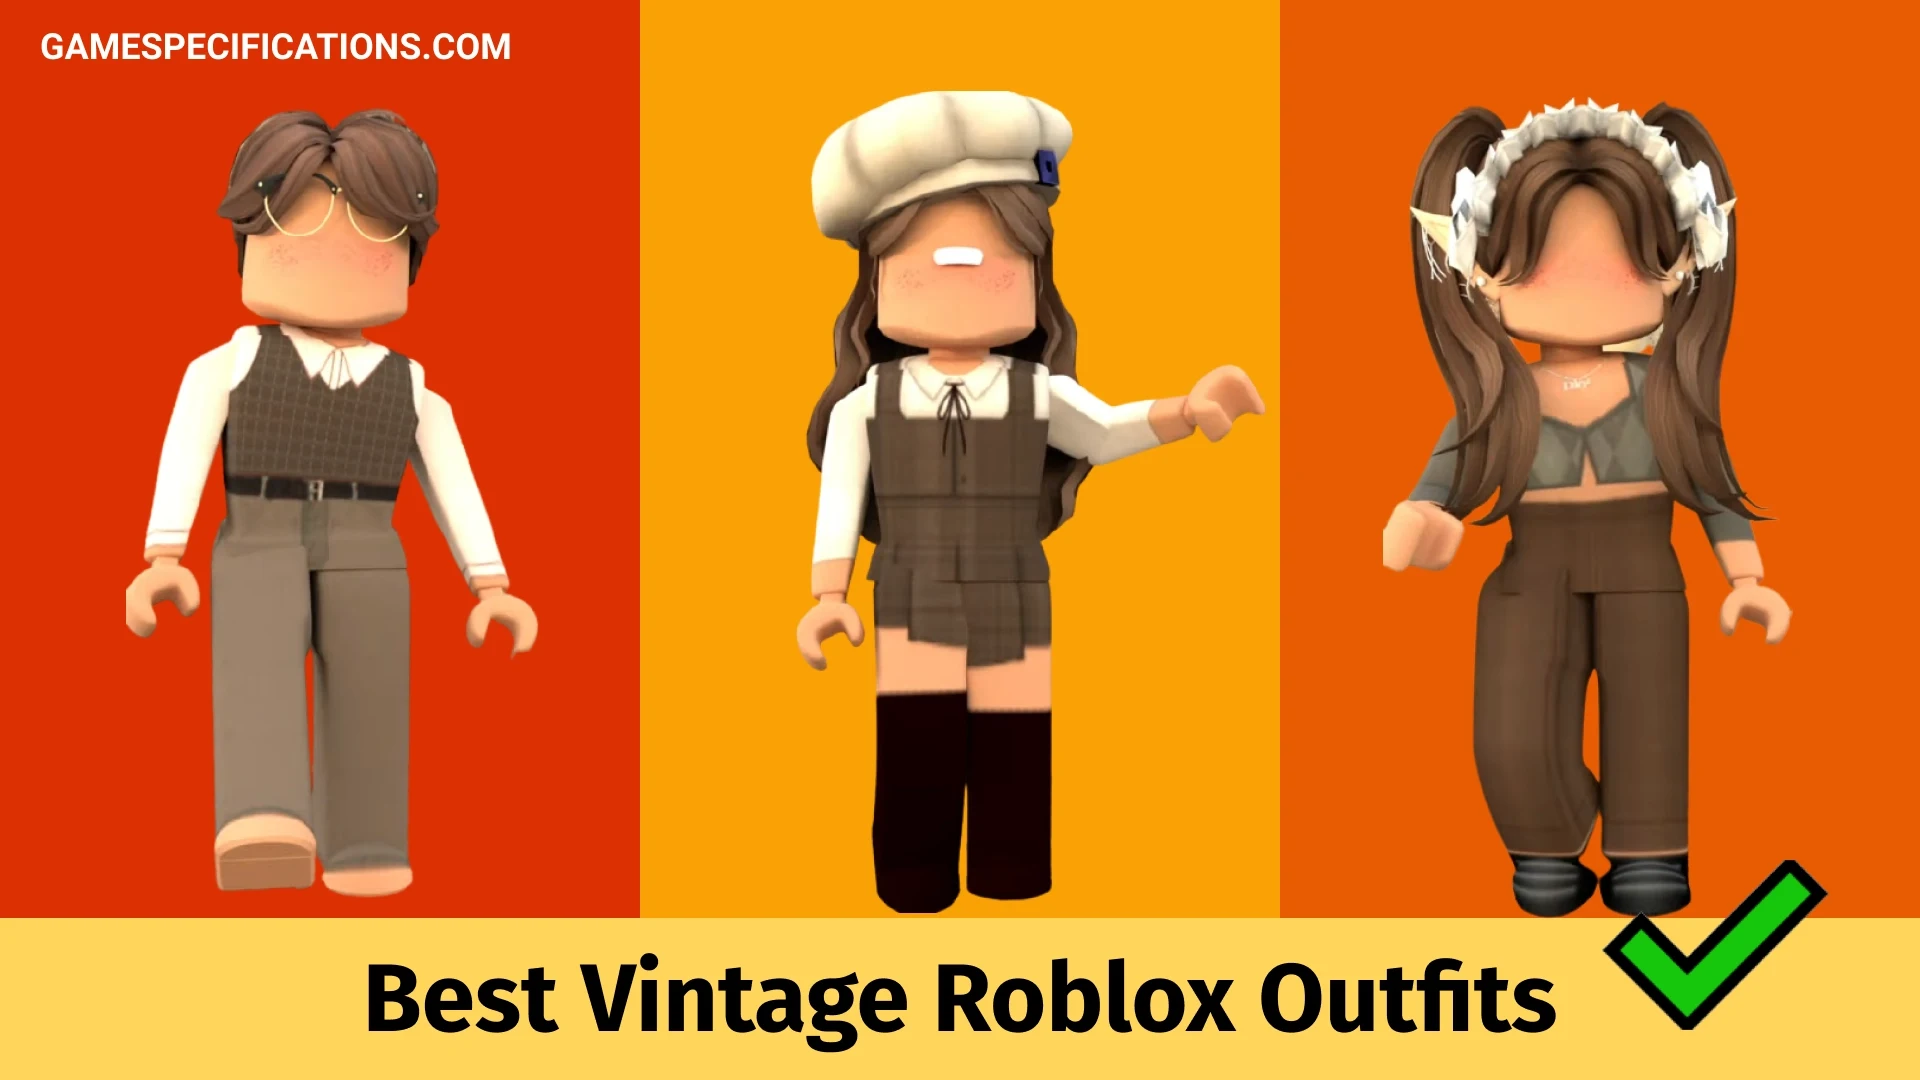 6 Vintage Roblox Outfits To Get Classy Vibe - Game Specifications